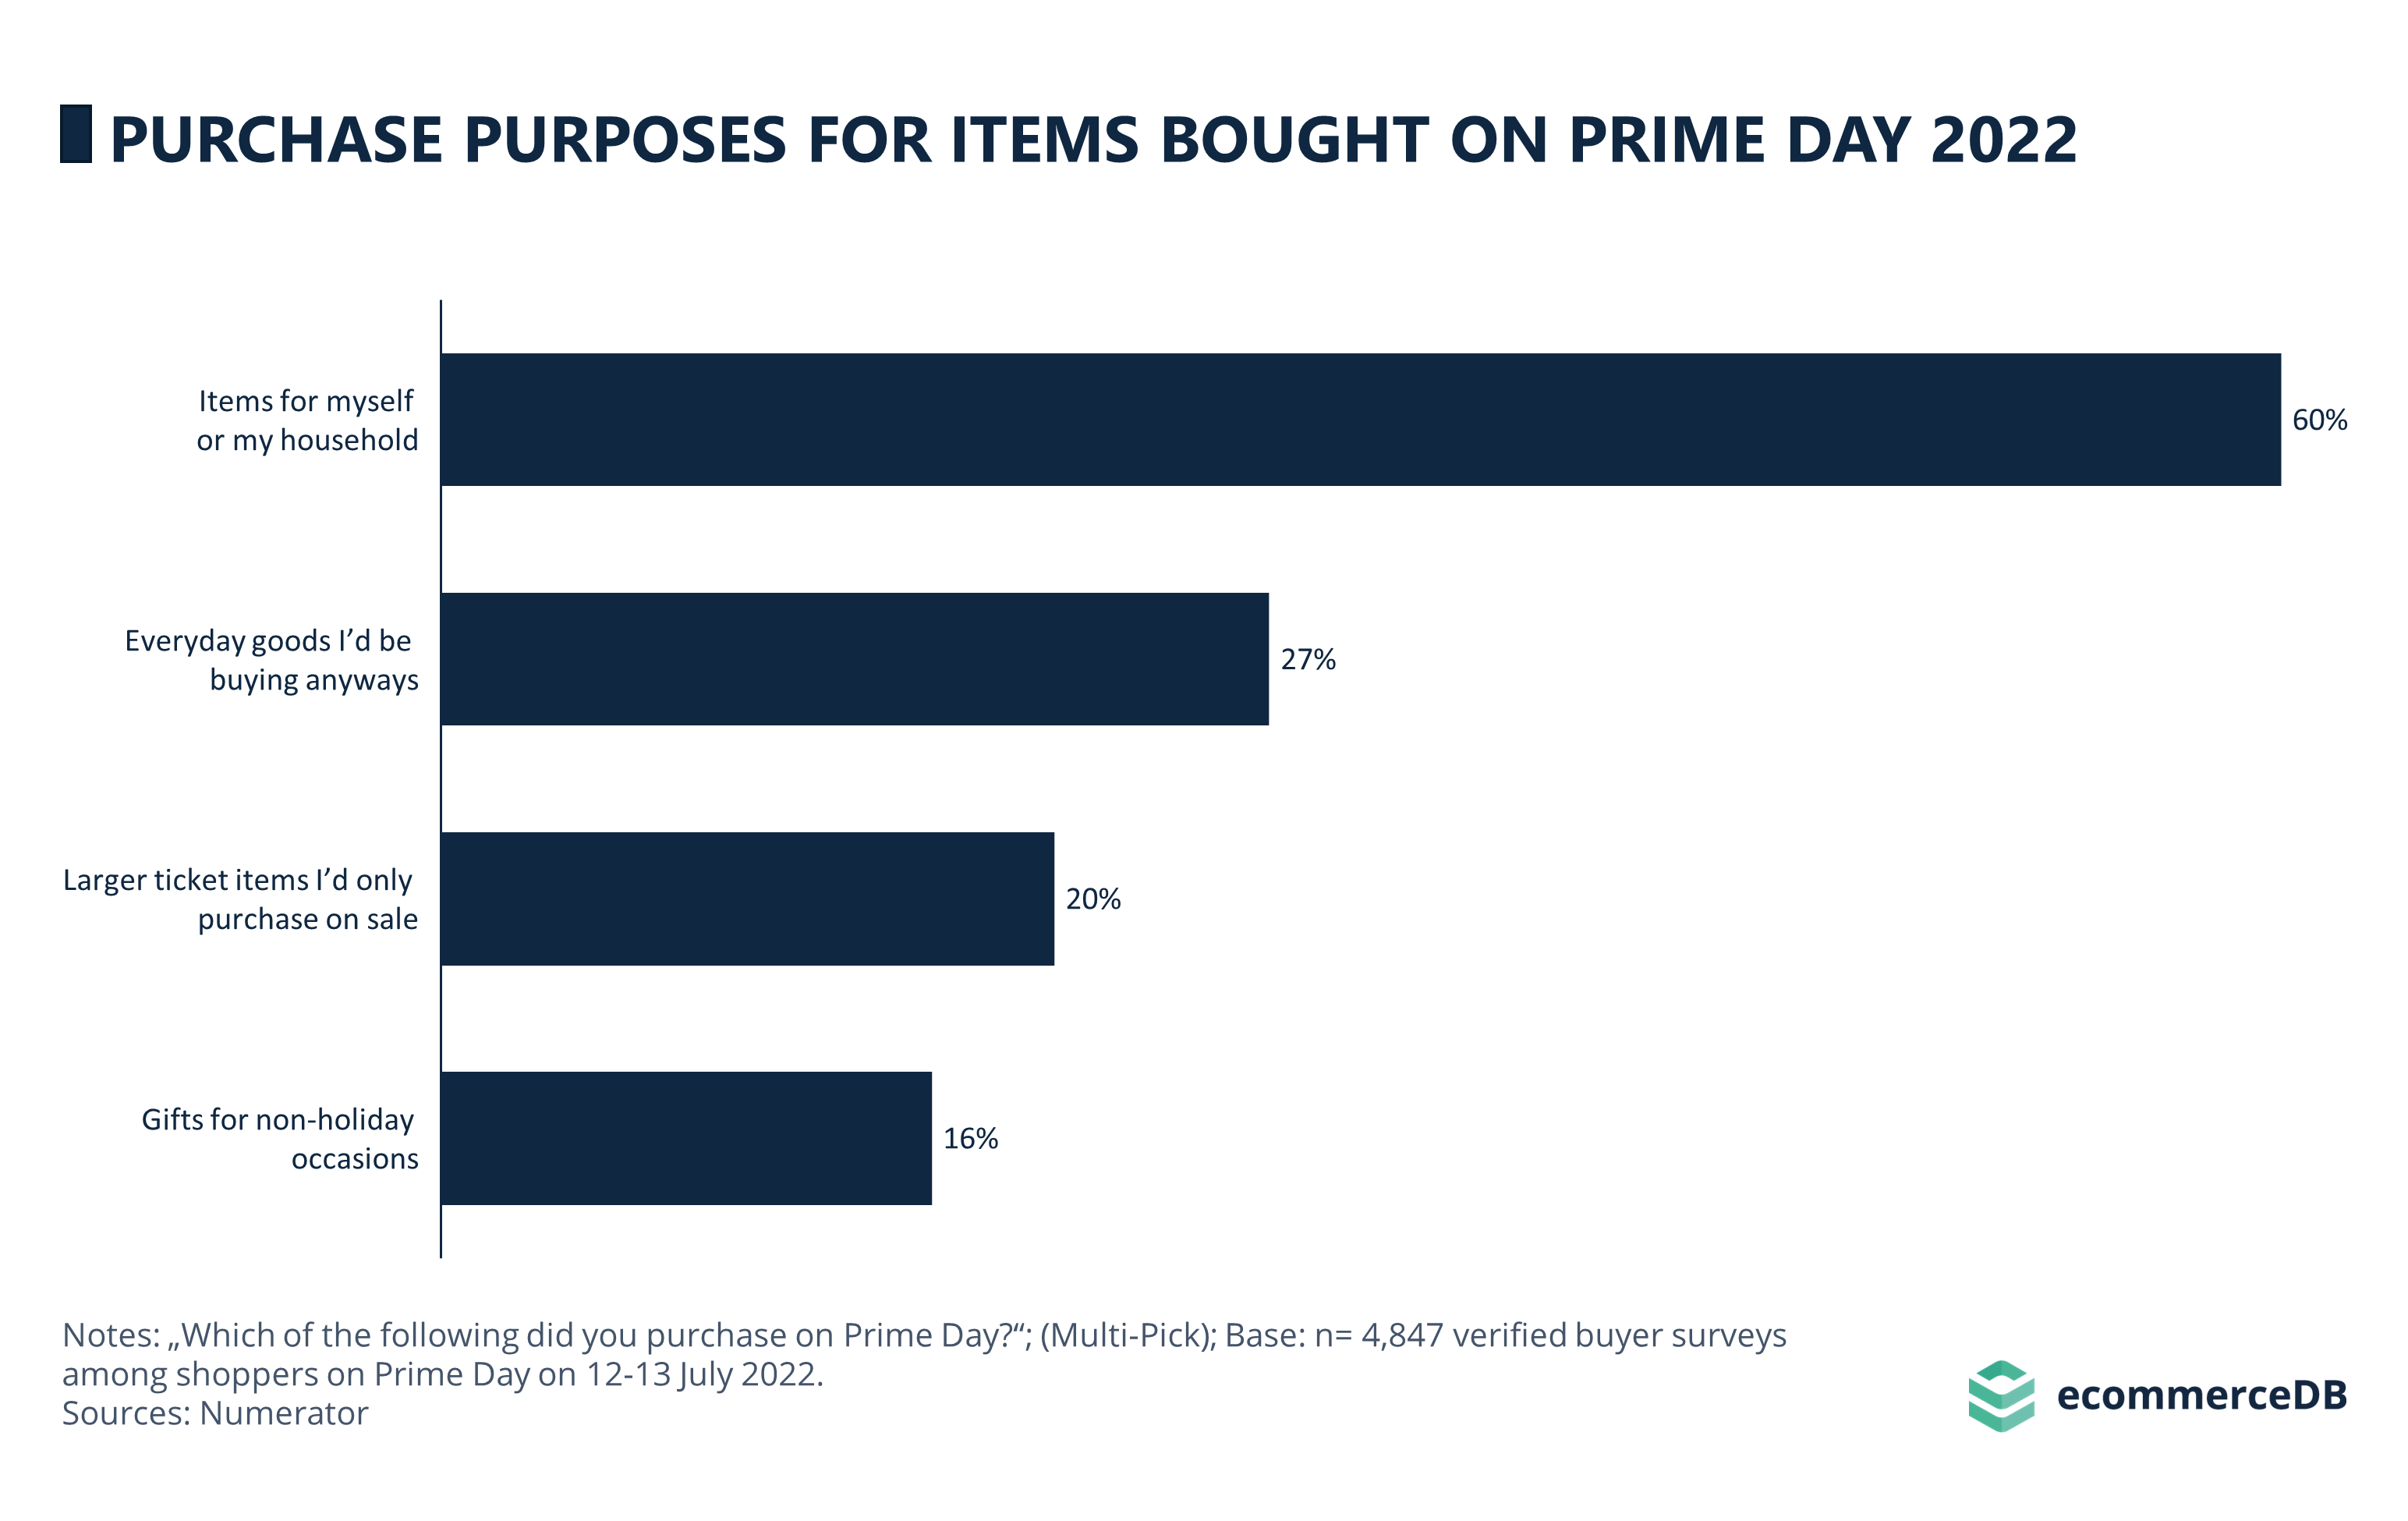 Prime Day 2022 deals still around for some items on